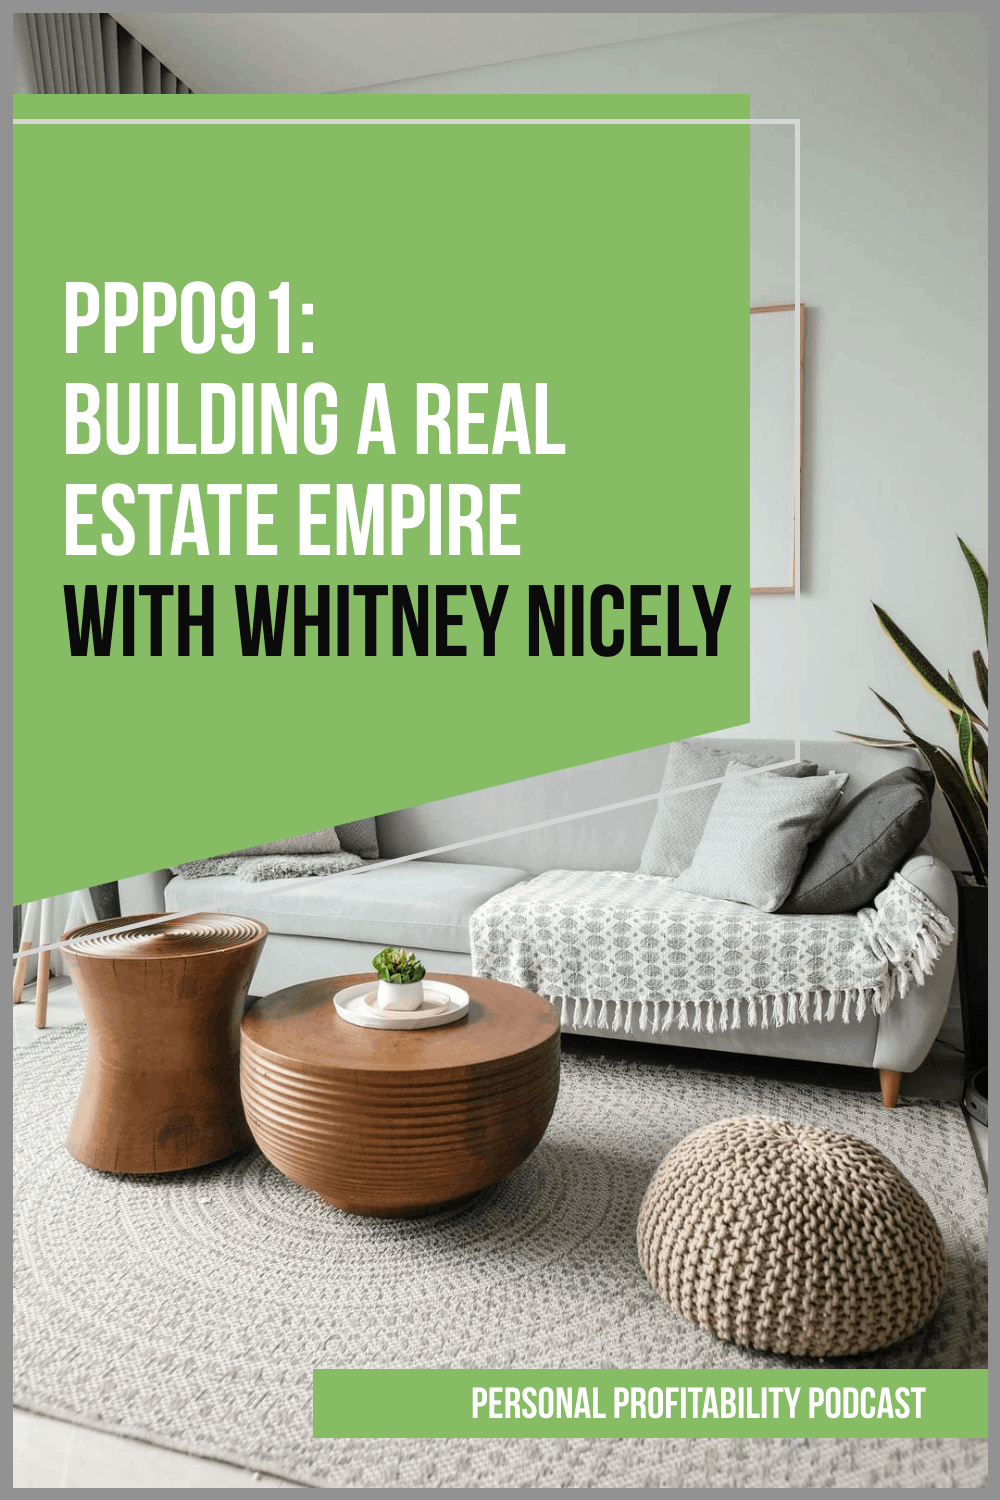 PPP091: Whitney Nicely on Building a Real Estate Empire